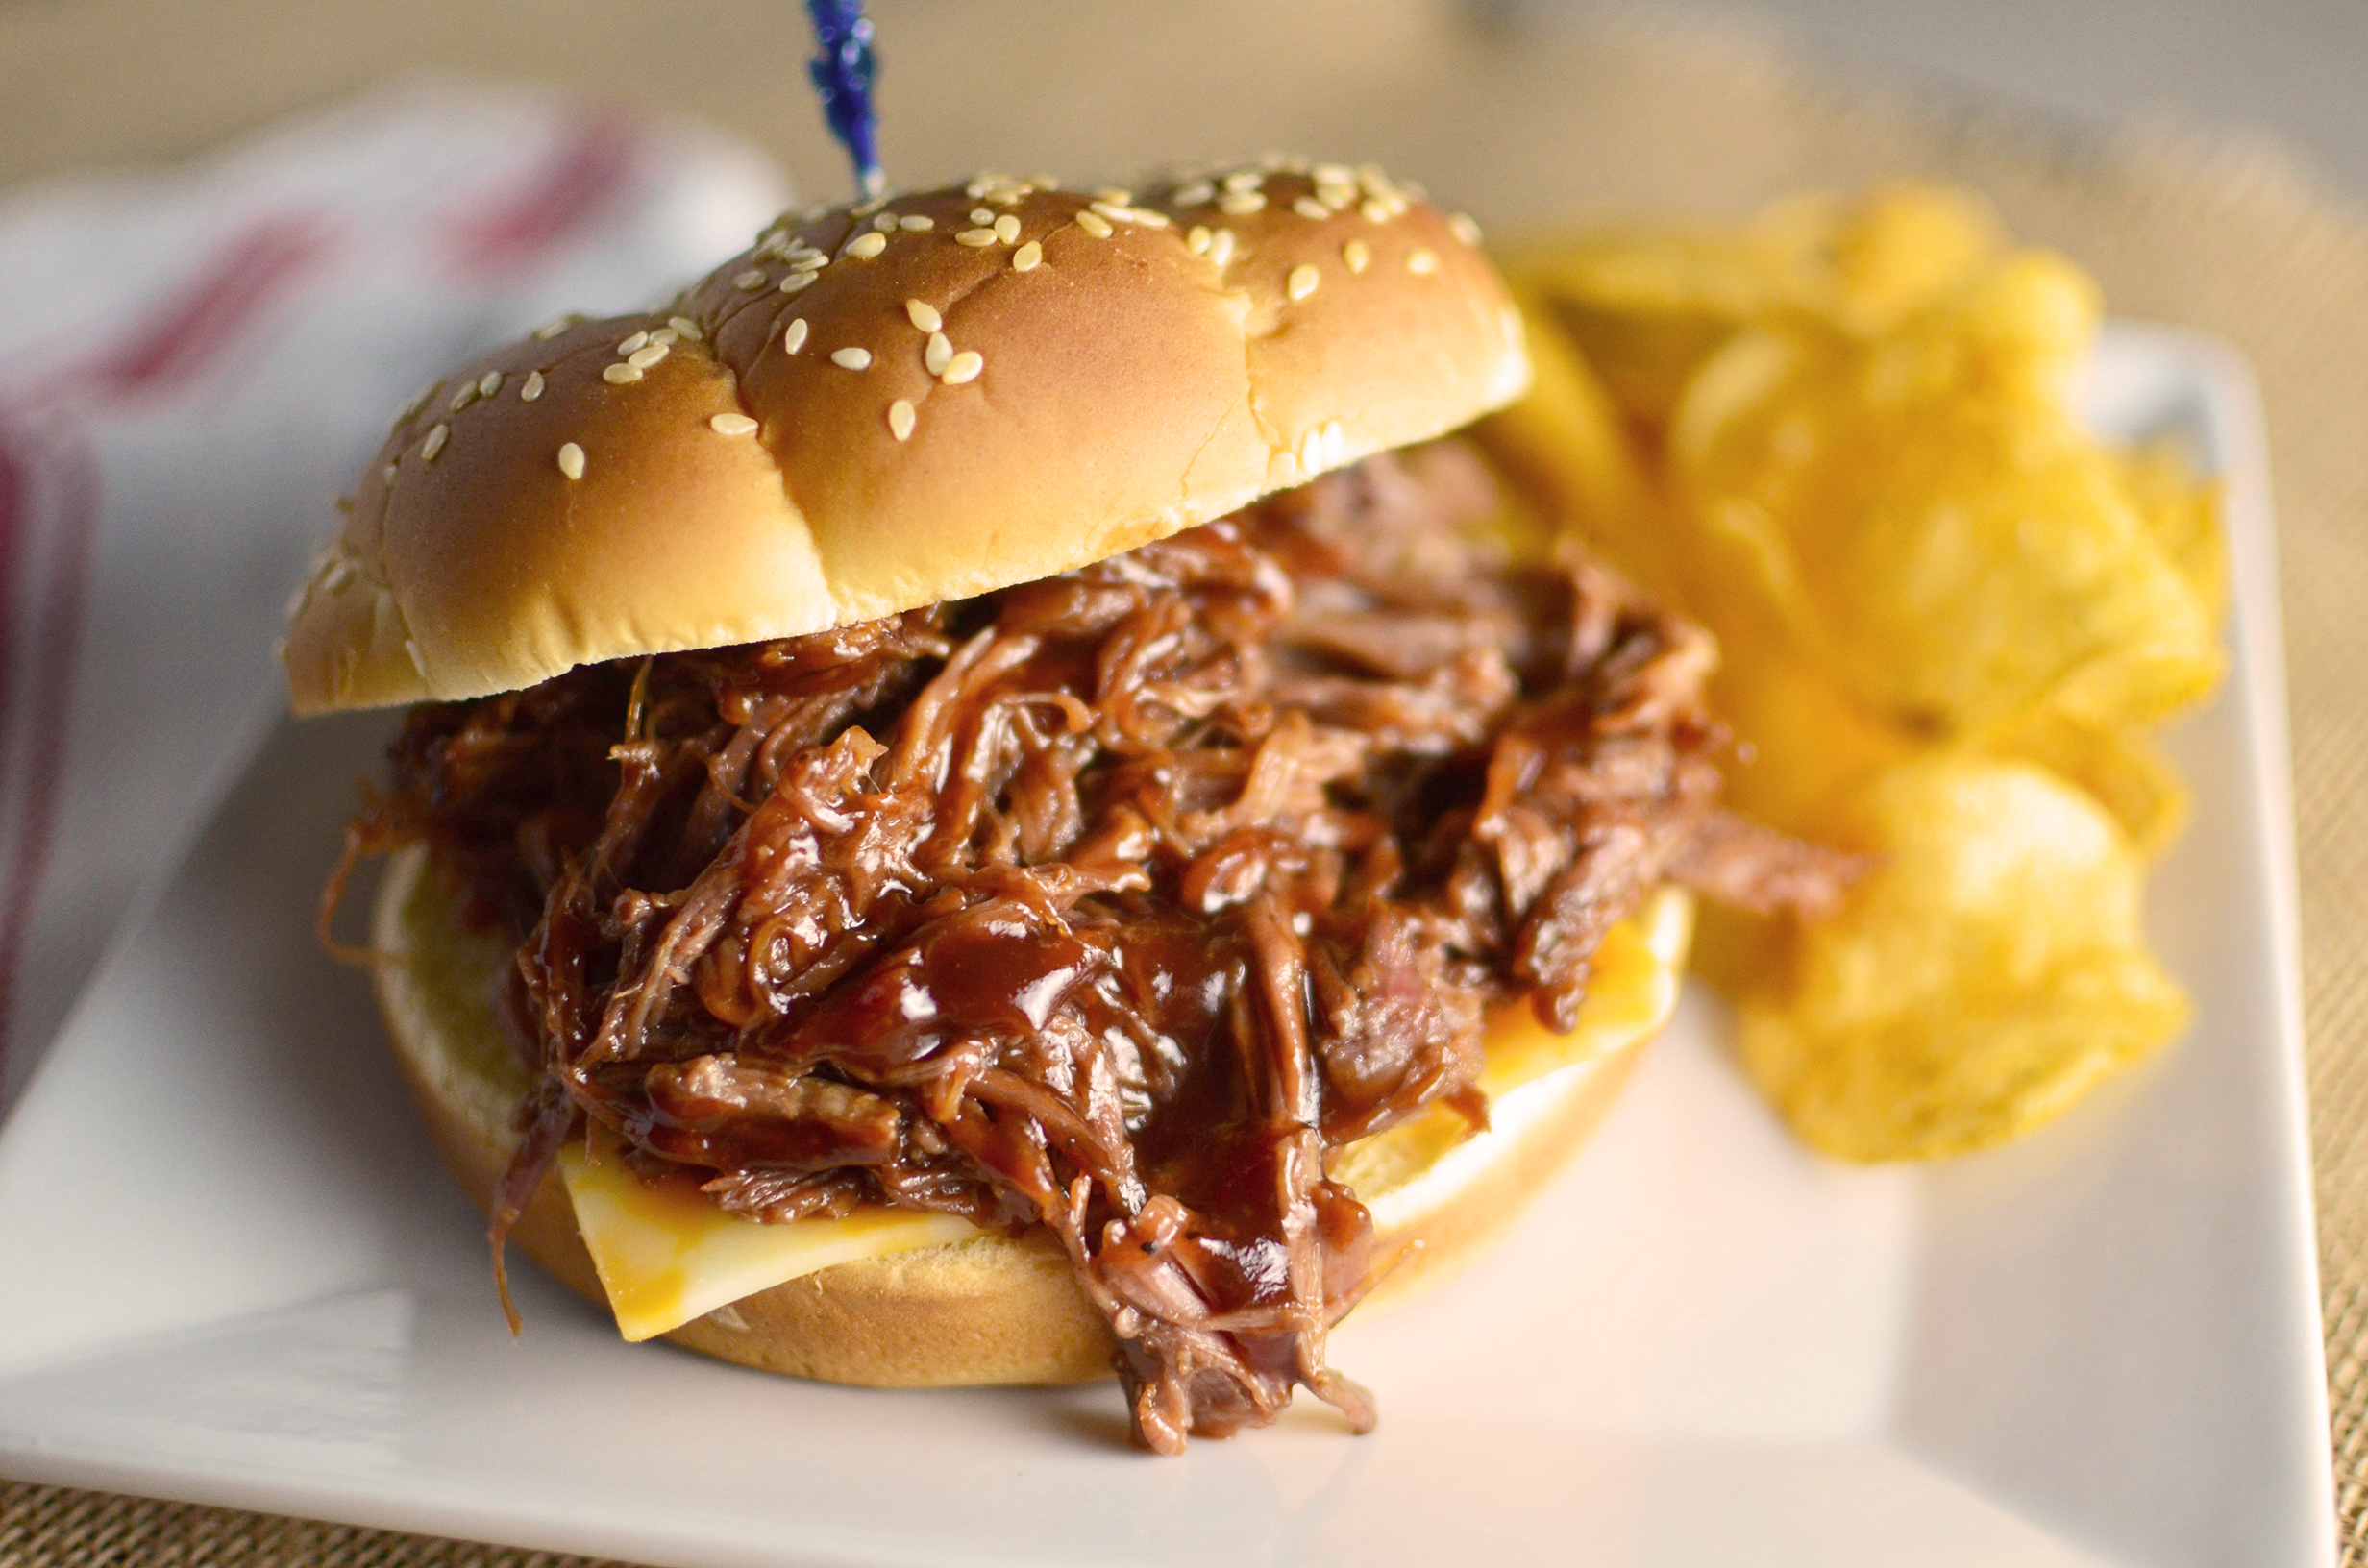 https://www.simplesweetsavory.com/wp-content/uploads/2016/02/3-Ingredient-BBQ-Beef-Sandwiches-wide.jpg